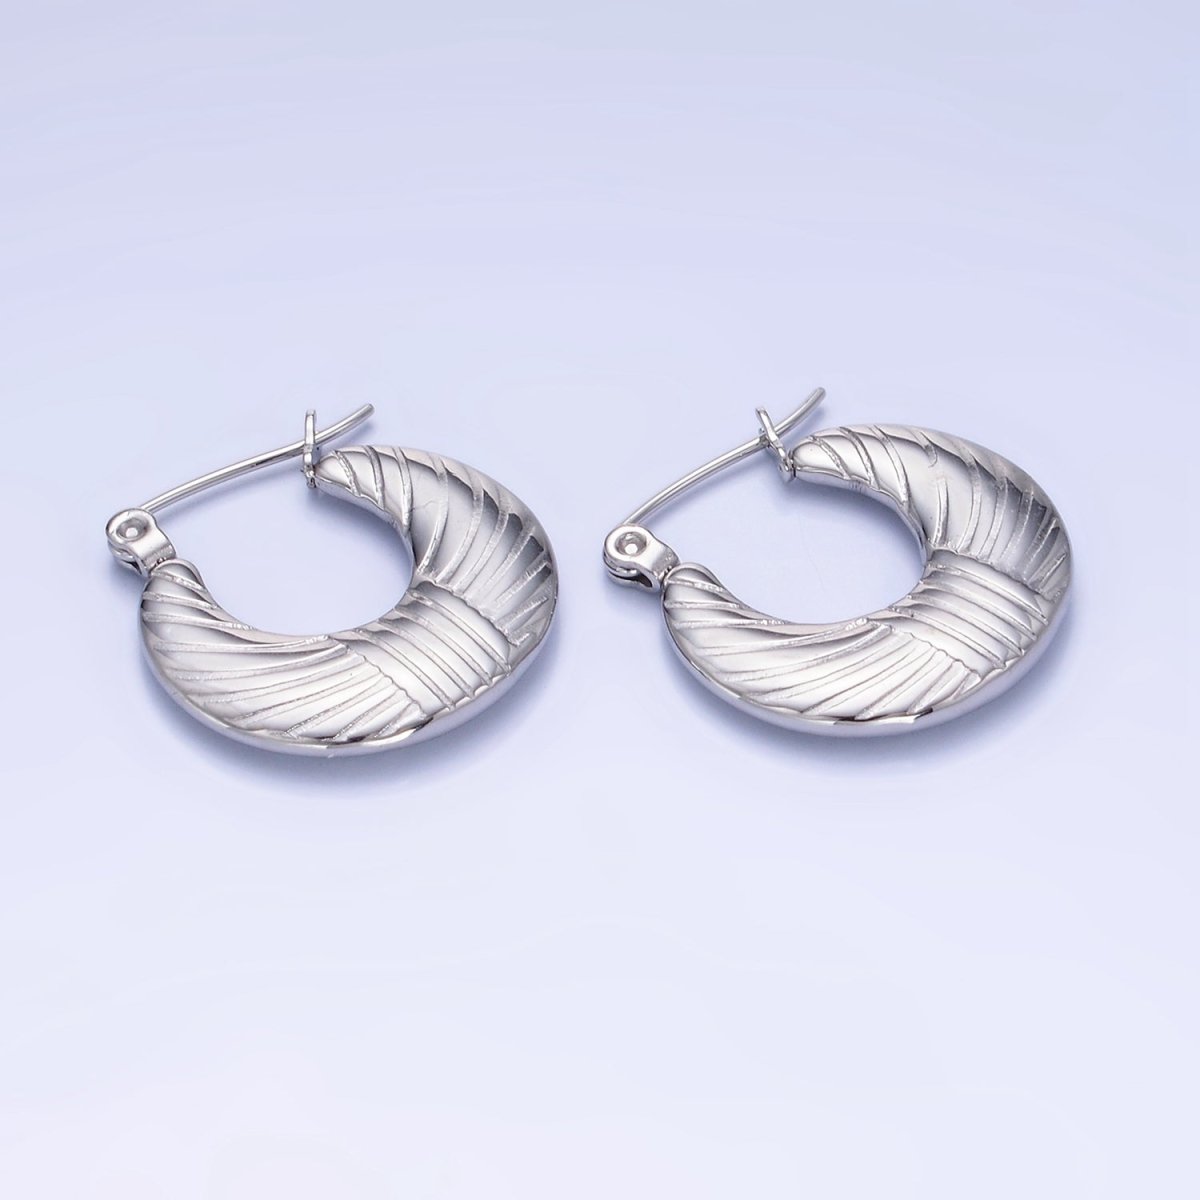 Stainless Steel 20mm Lined Round Latch Hoop Earrings in Gold & Silver | AB1386 AB1387 - DLUXCA